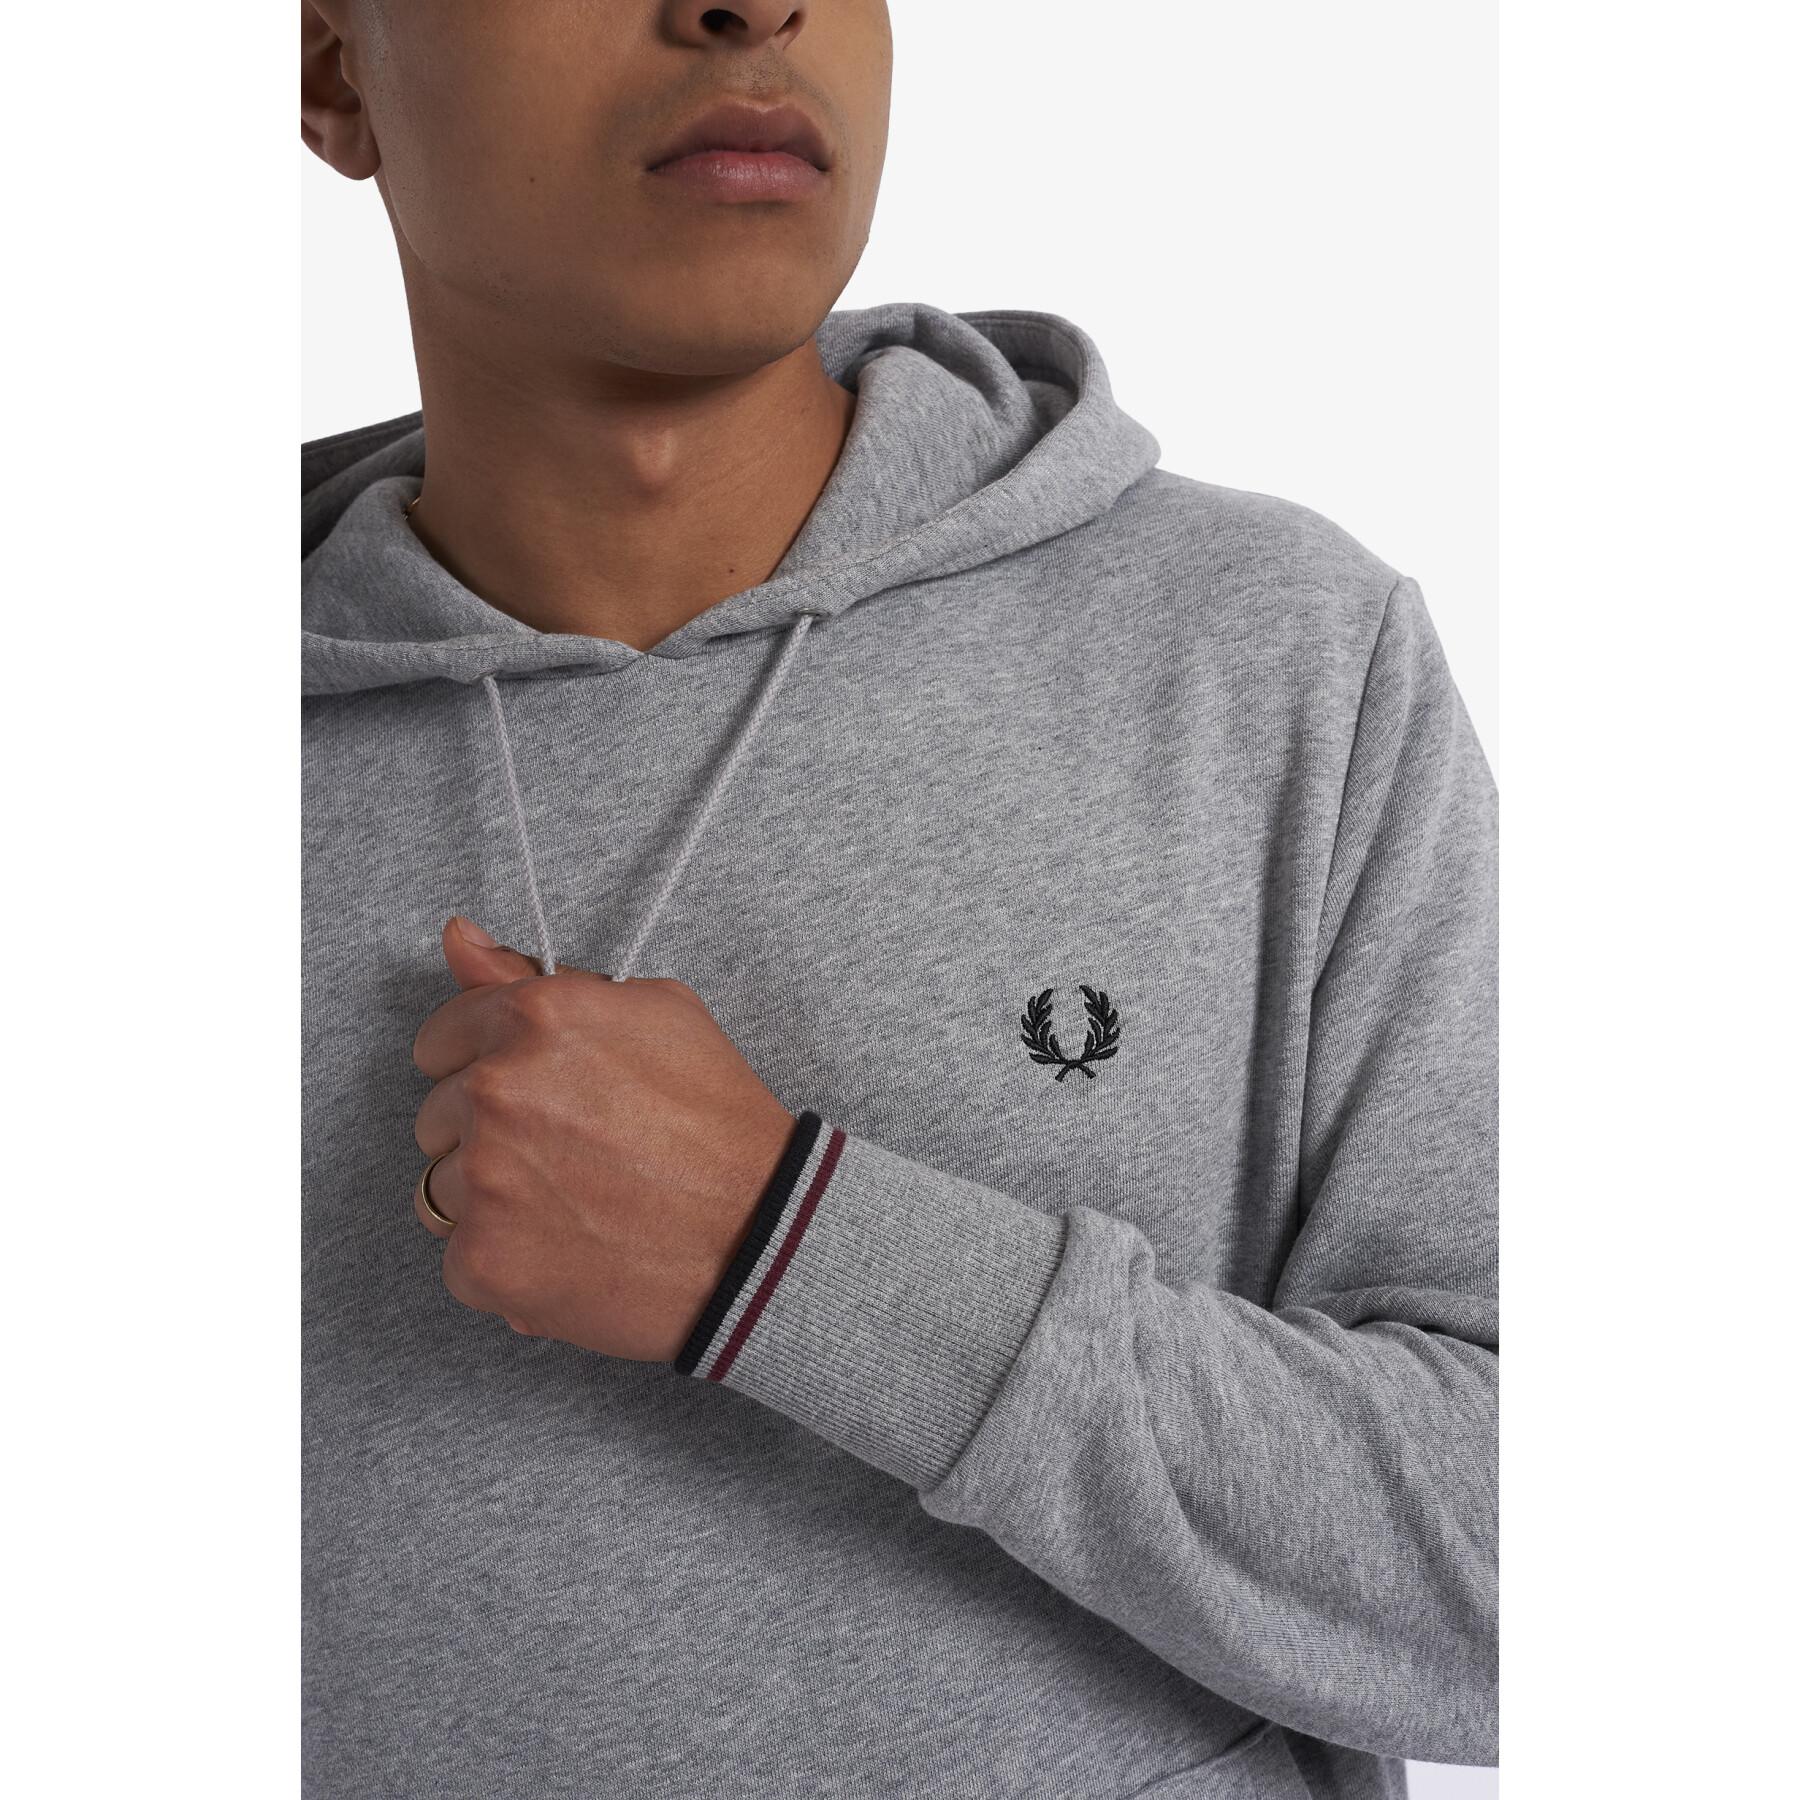 Sweatshirt Fred Perry Tipped